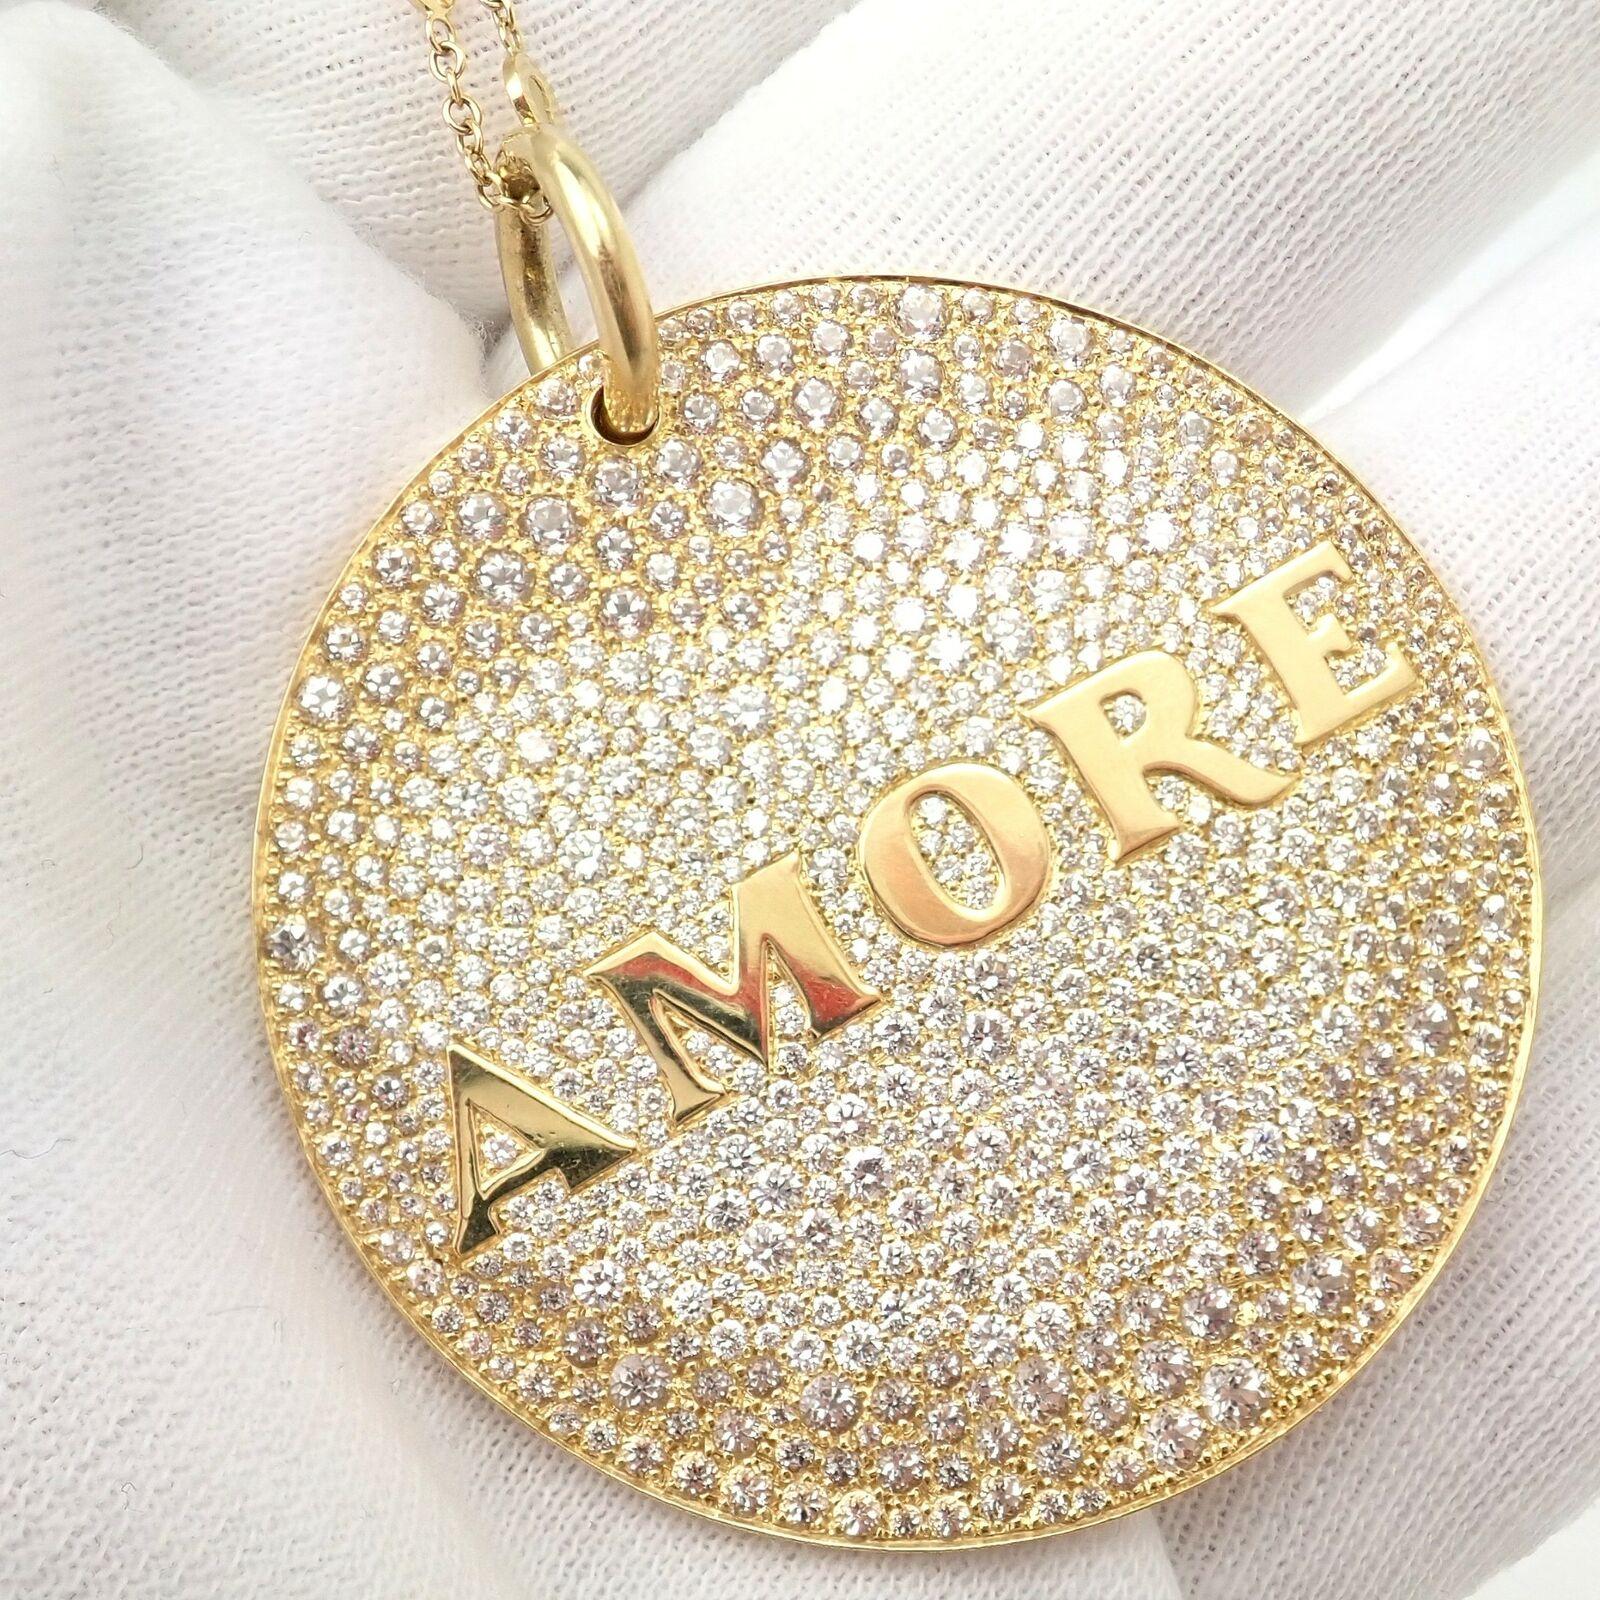 Pasquale Bruni Profondo Amore Diamond Yellow Gold Pendant Necklace In Excellent Condition For Sale In Holland, PA